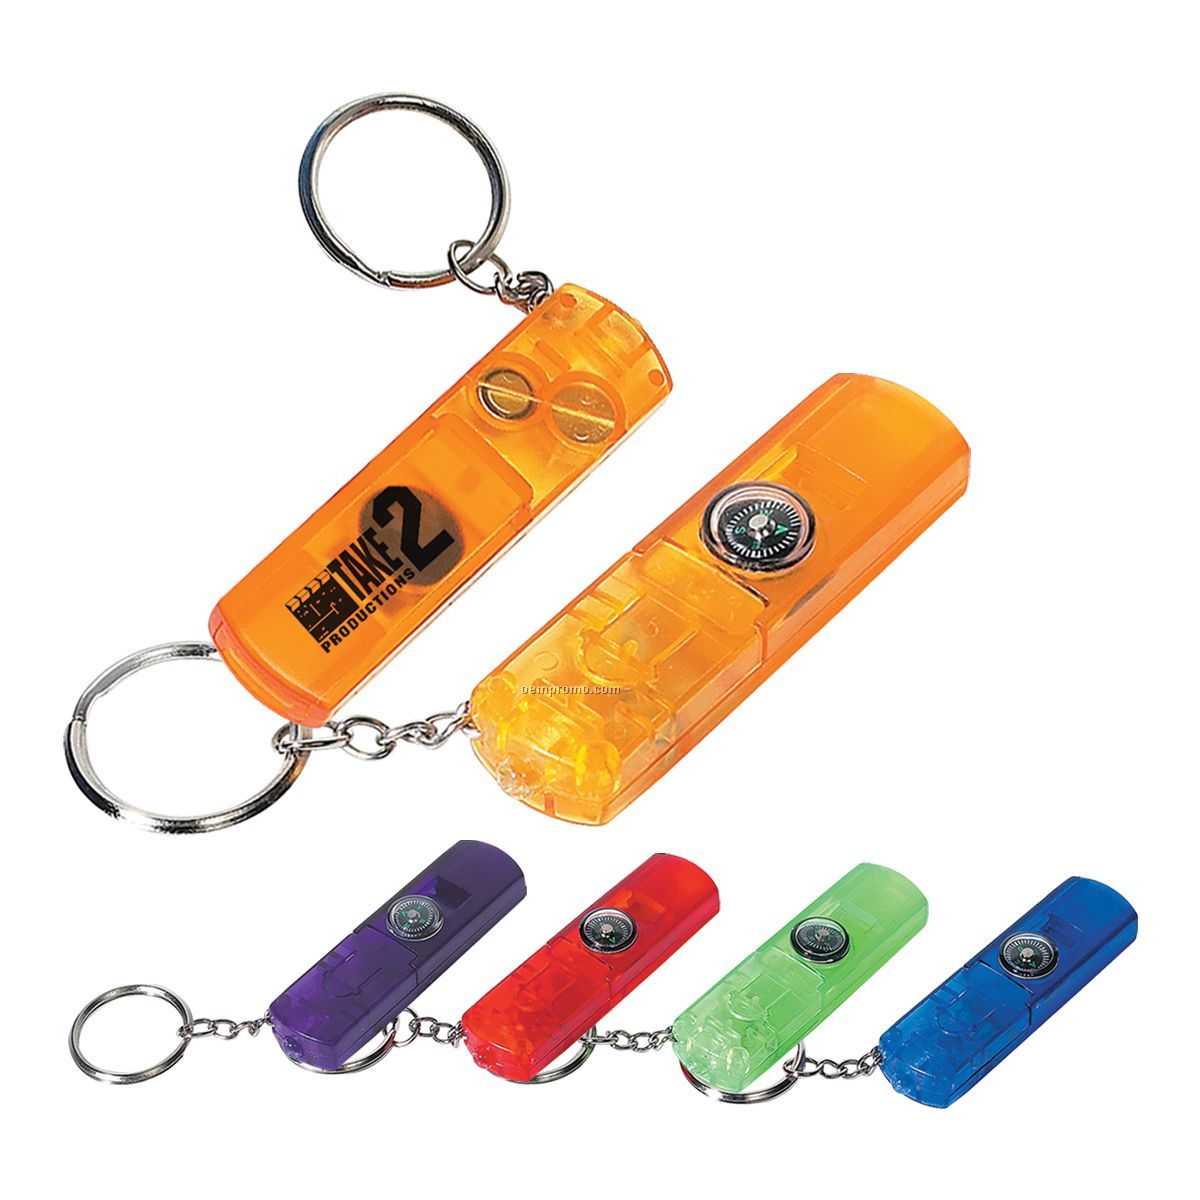 Whistle/ Light & Compass Keychain